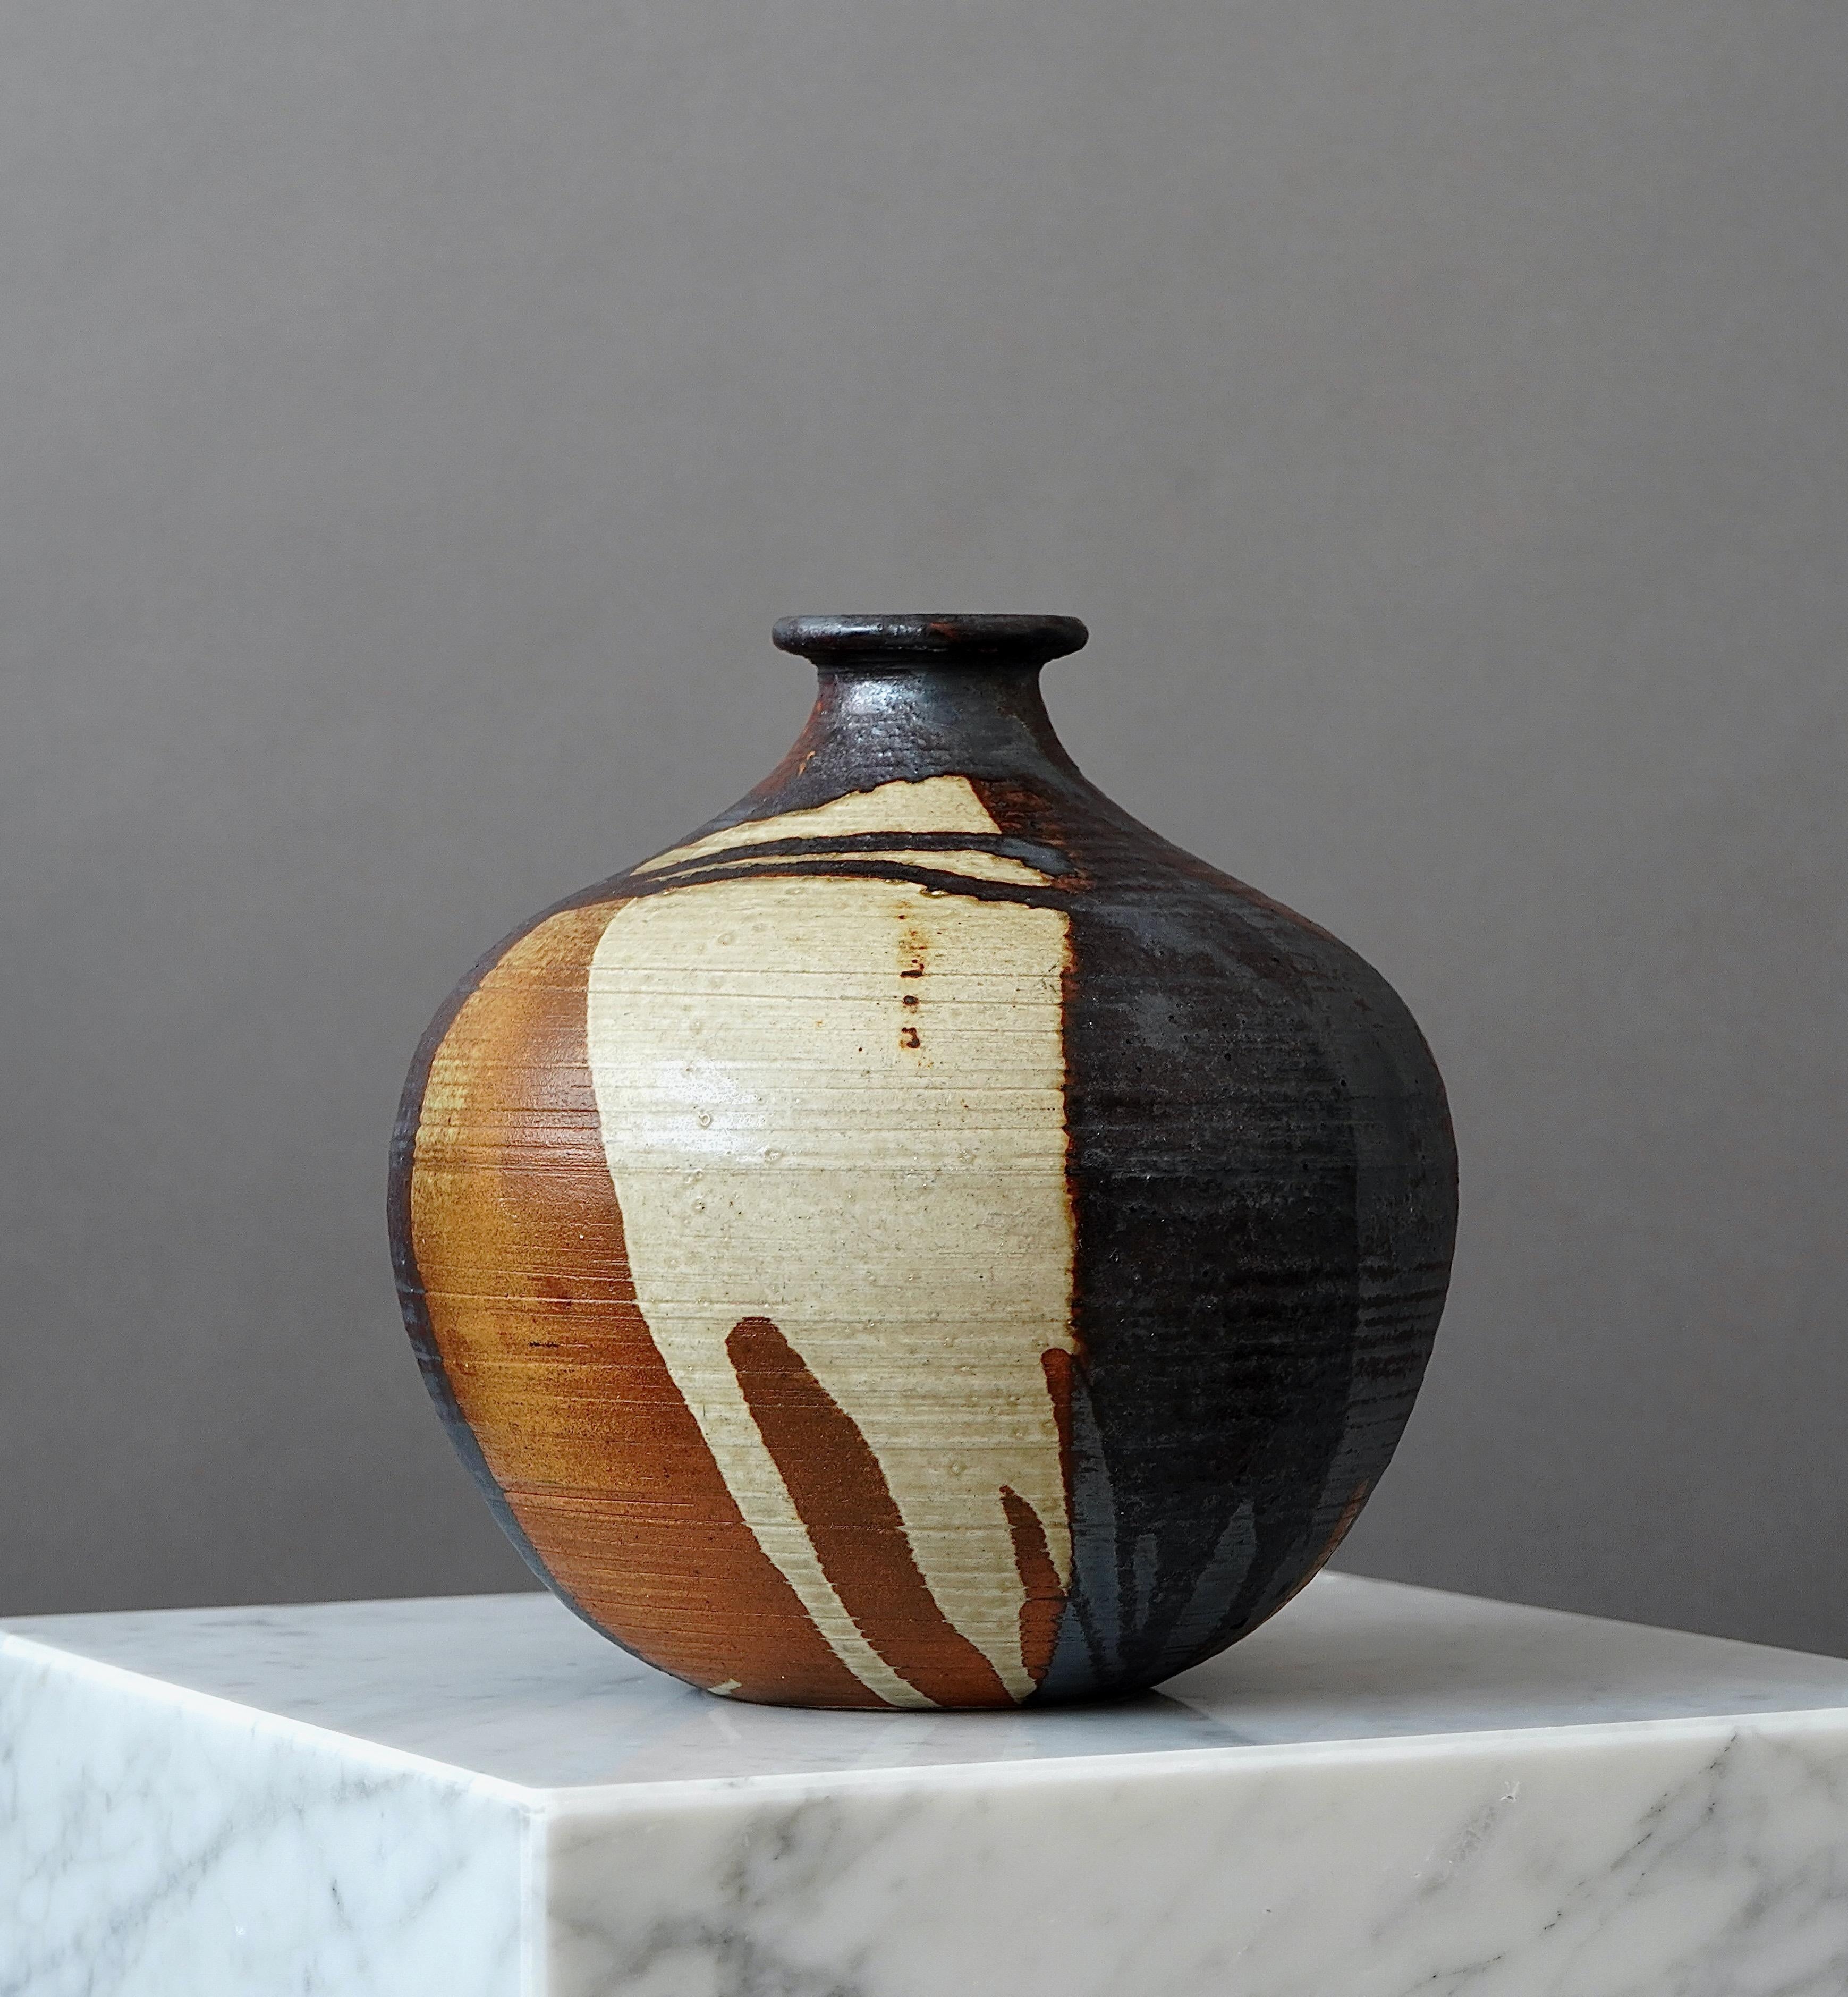 A beautiful stoneware vase with amazing glaze.
Made by Annikki Hovisaari for Arabia, Finland, 1960s

Great condition.
Incised signature 'AH' and 'ARABIA'.

Annikki Hovisaari (1918–2004) was one of Finland’s leading ceramic artists in the 20th